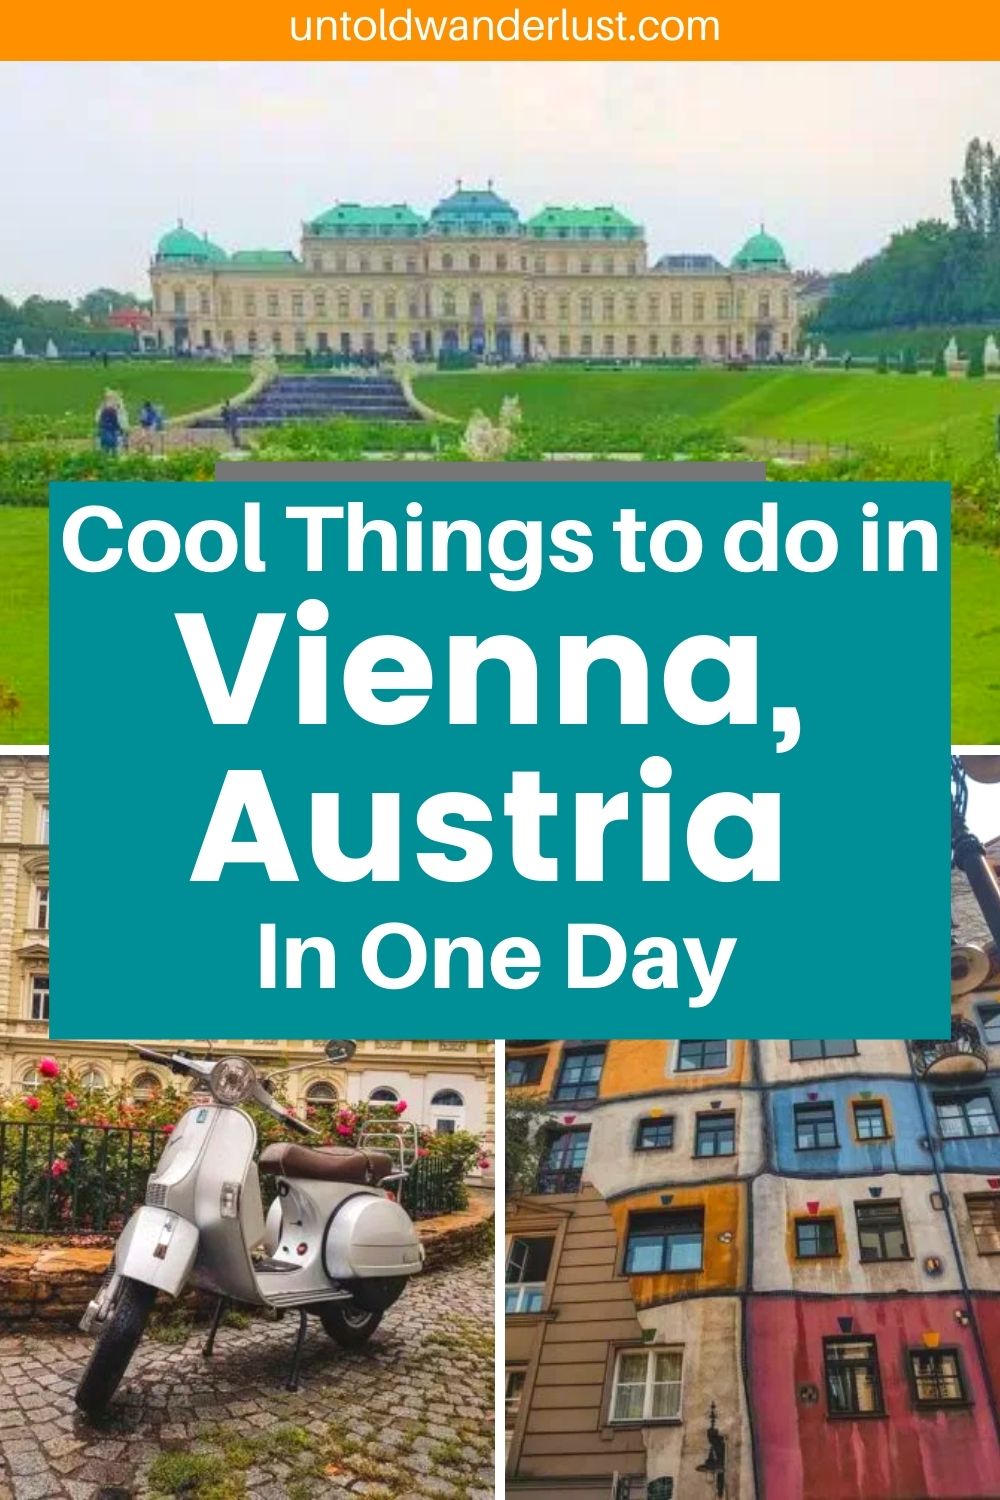 Cool Things to do in Vienna, Austria in 1 Day